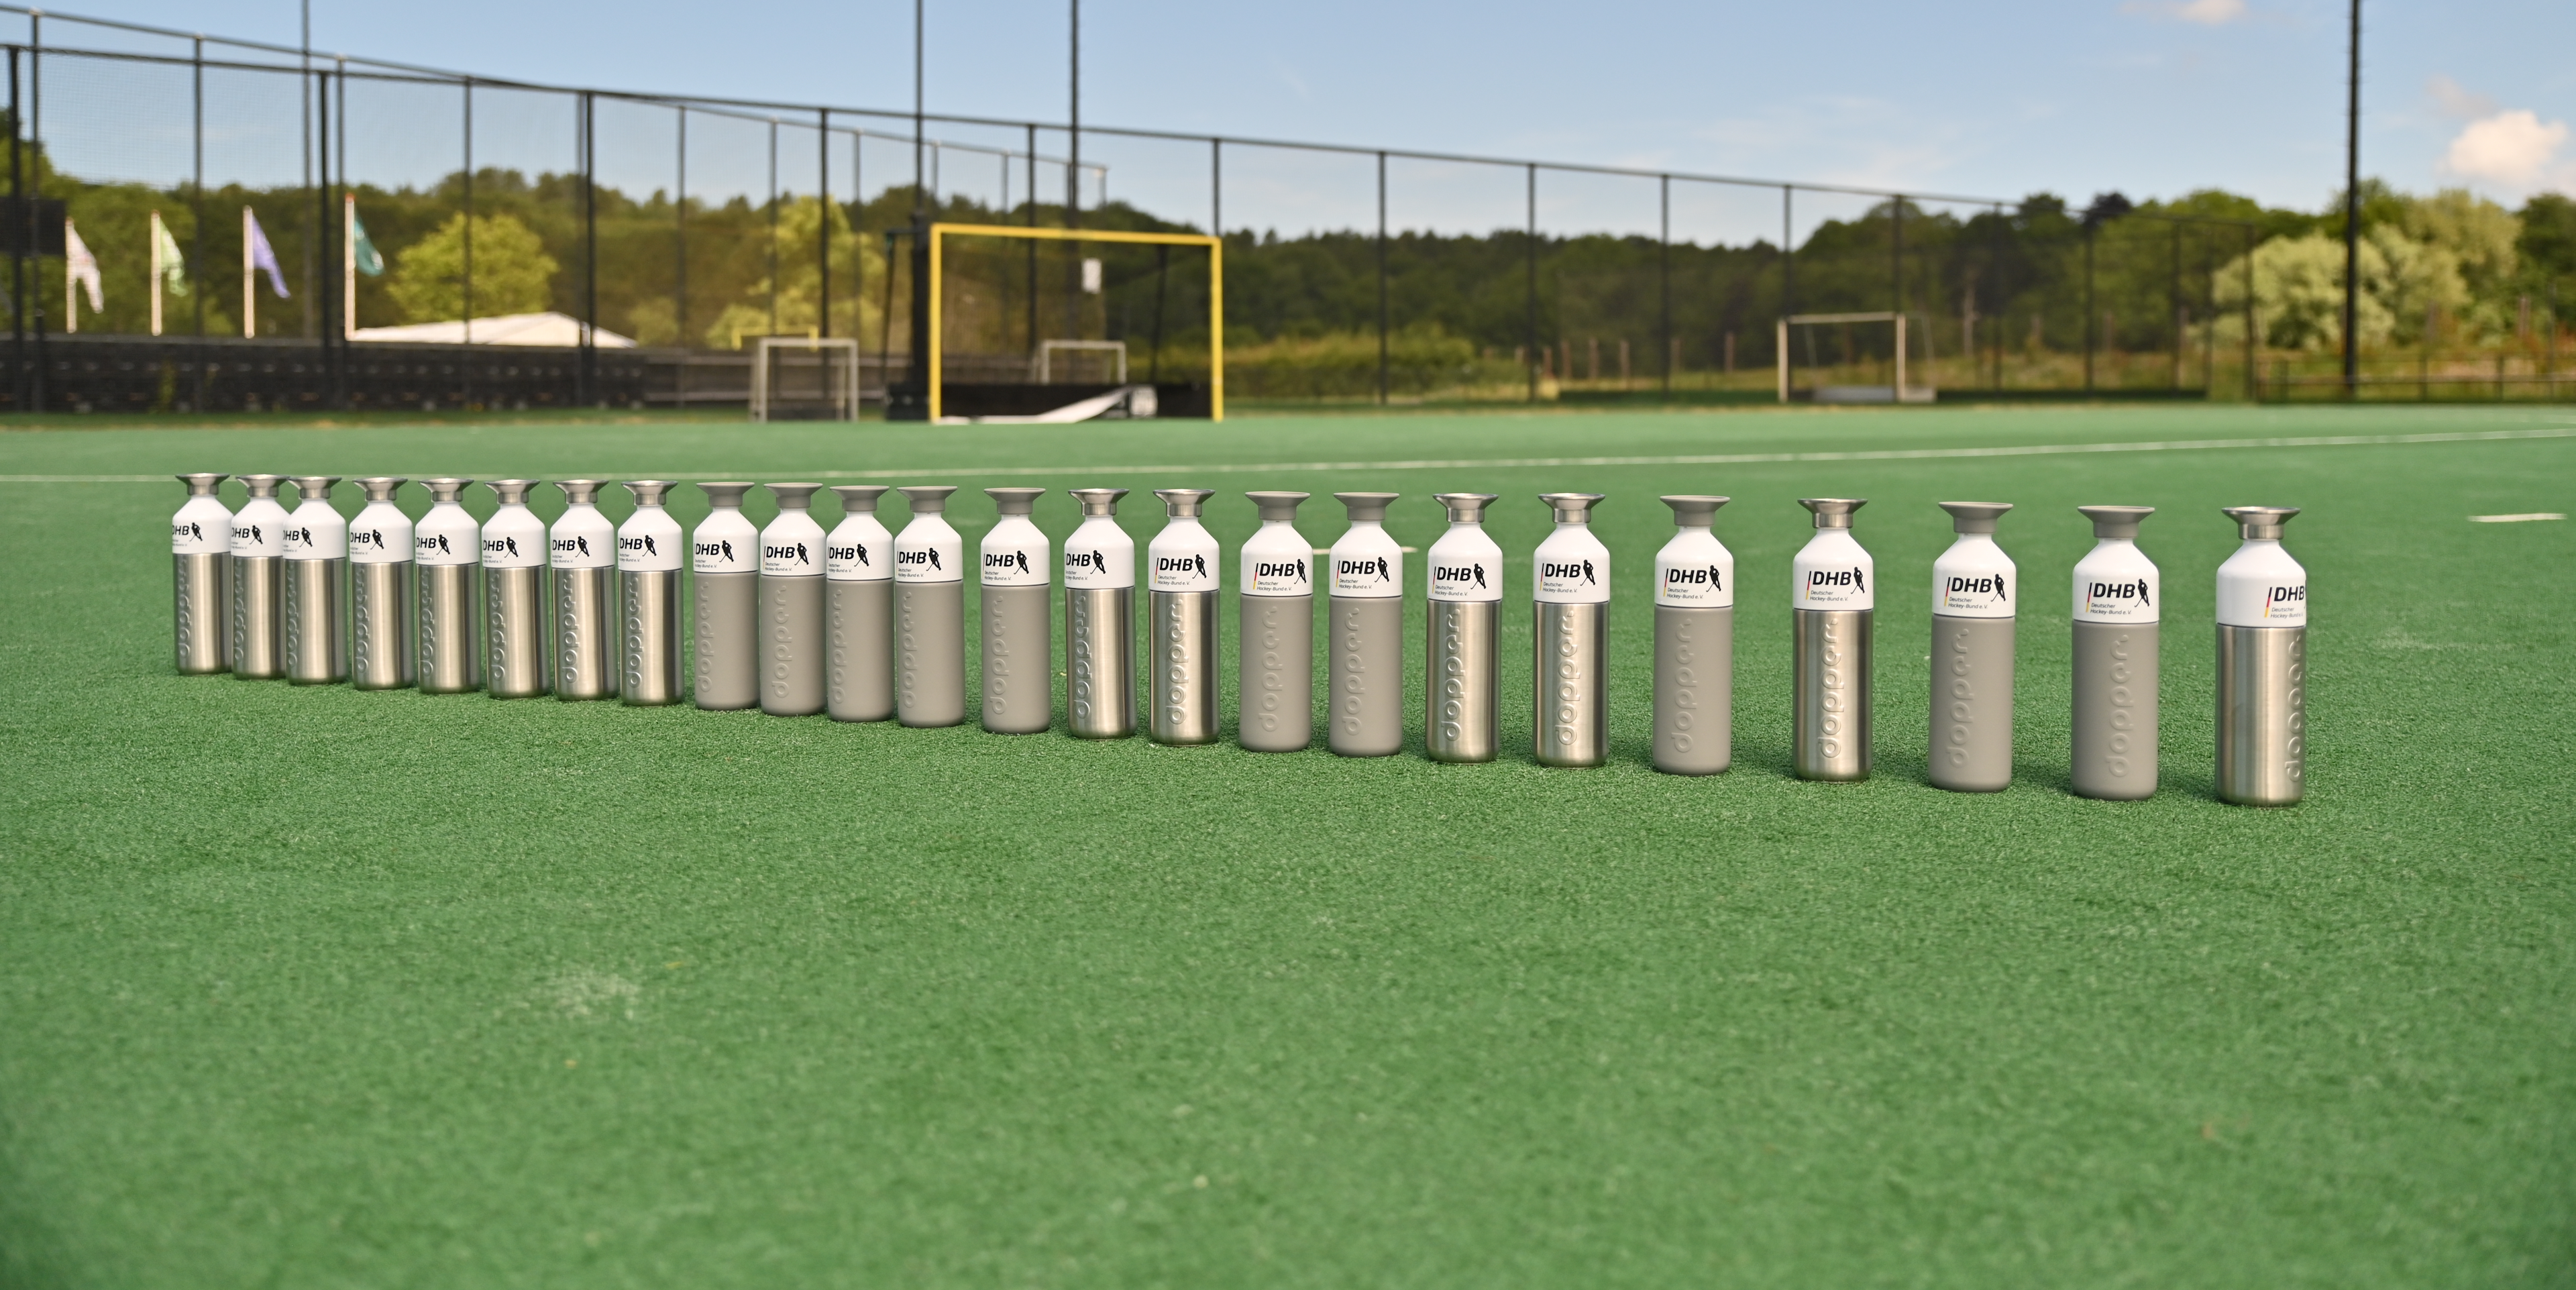 Line up of Steel and grey customised Dopper bottles on a field hockey field